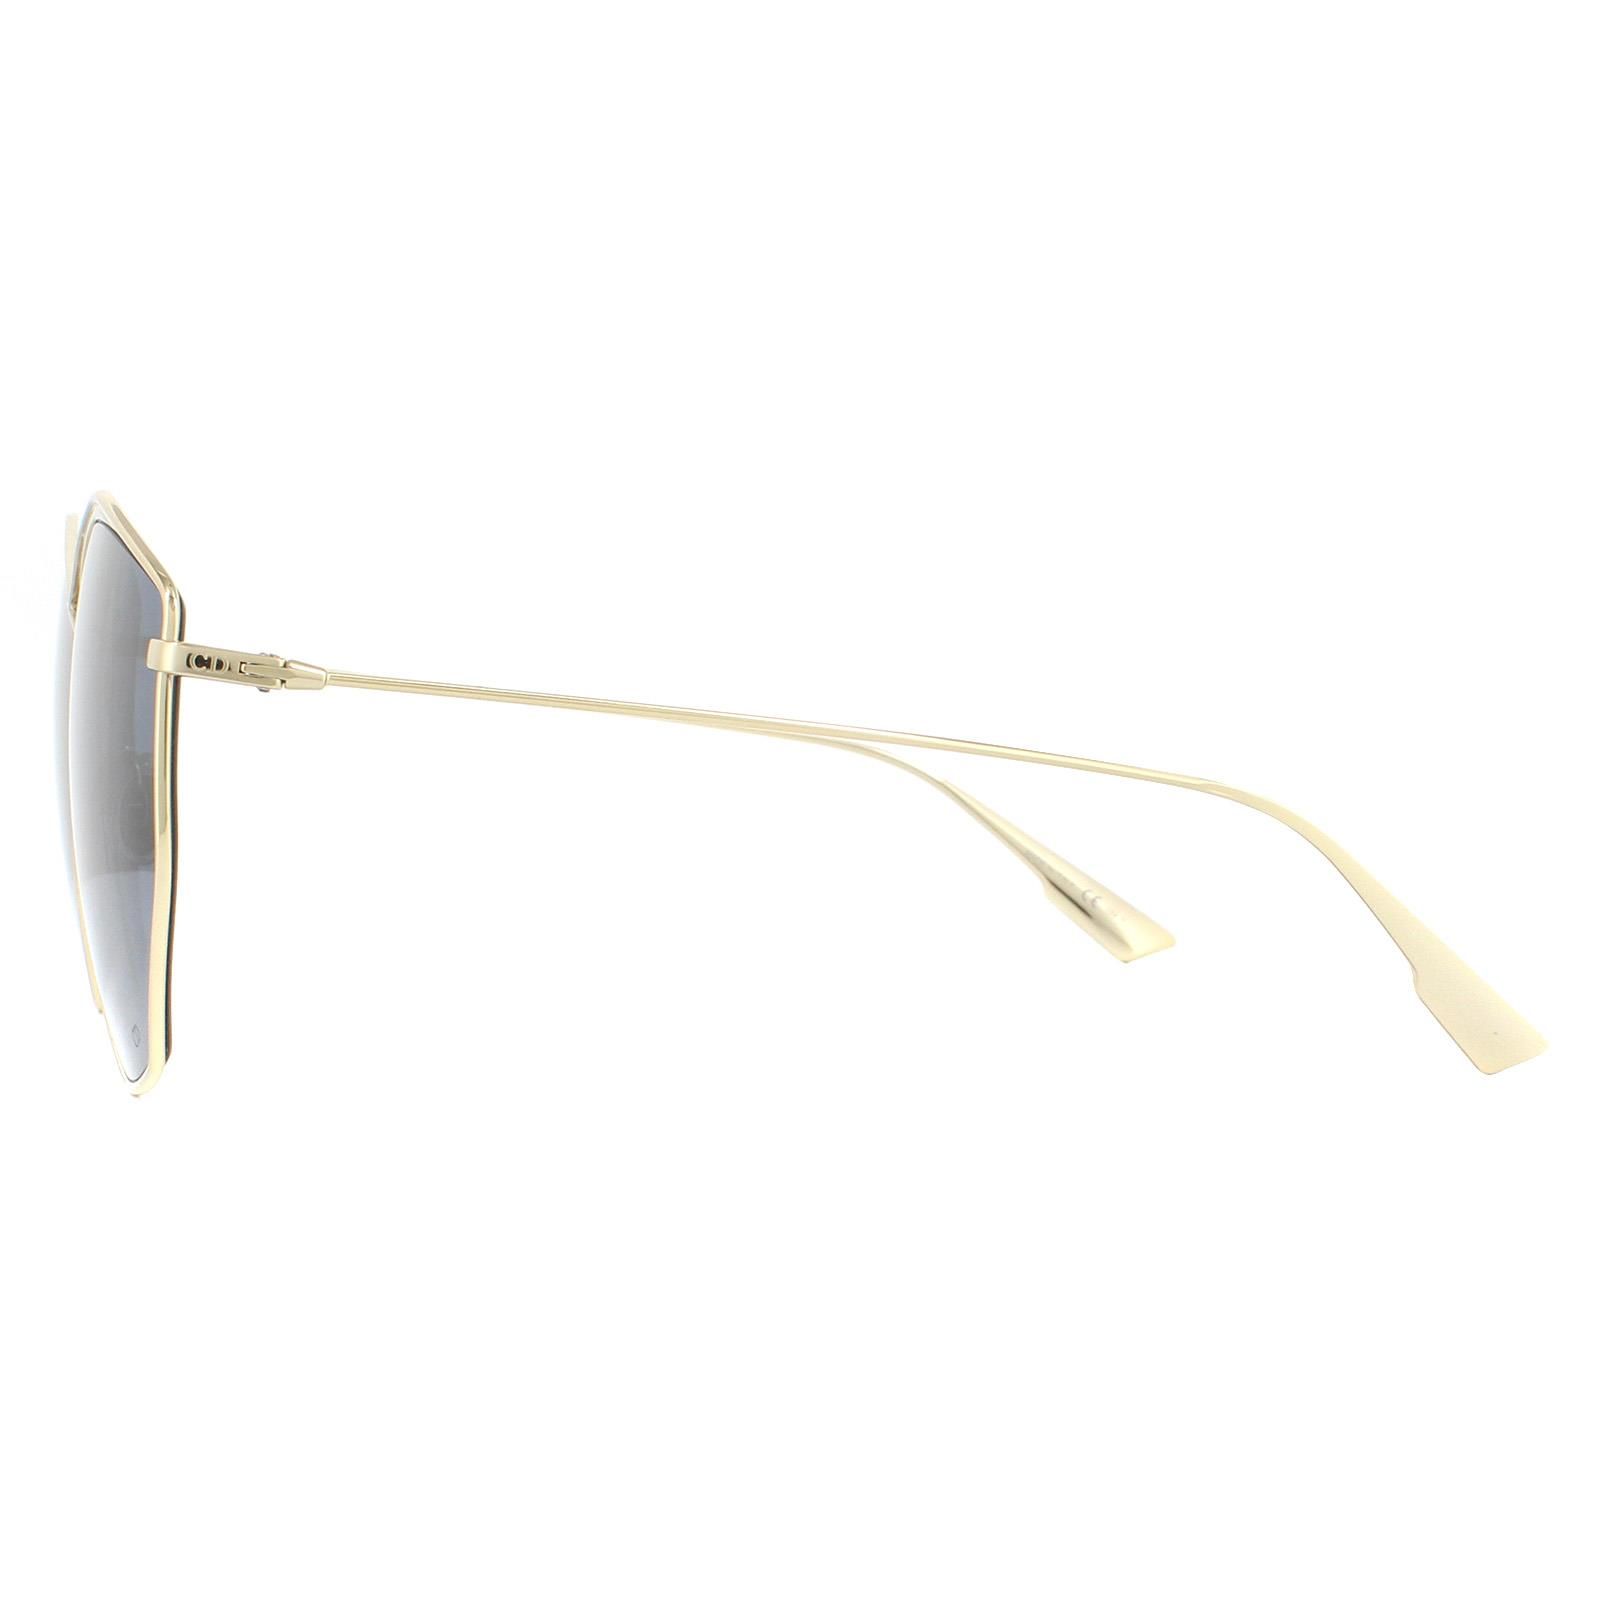 Dior Sunglasses Stellaire 4 J5G DC Gold Silver Mirror are a feminine cat eye style made from lightweight acetate. The temples are embedded with the Dior logo to provide brand recognition.